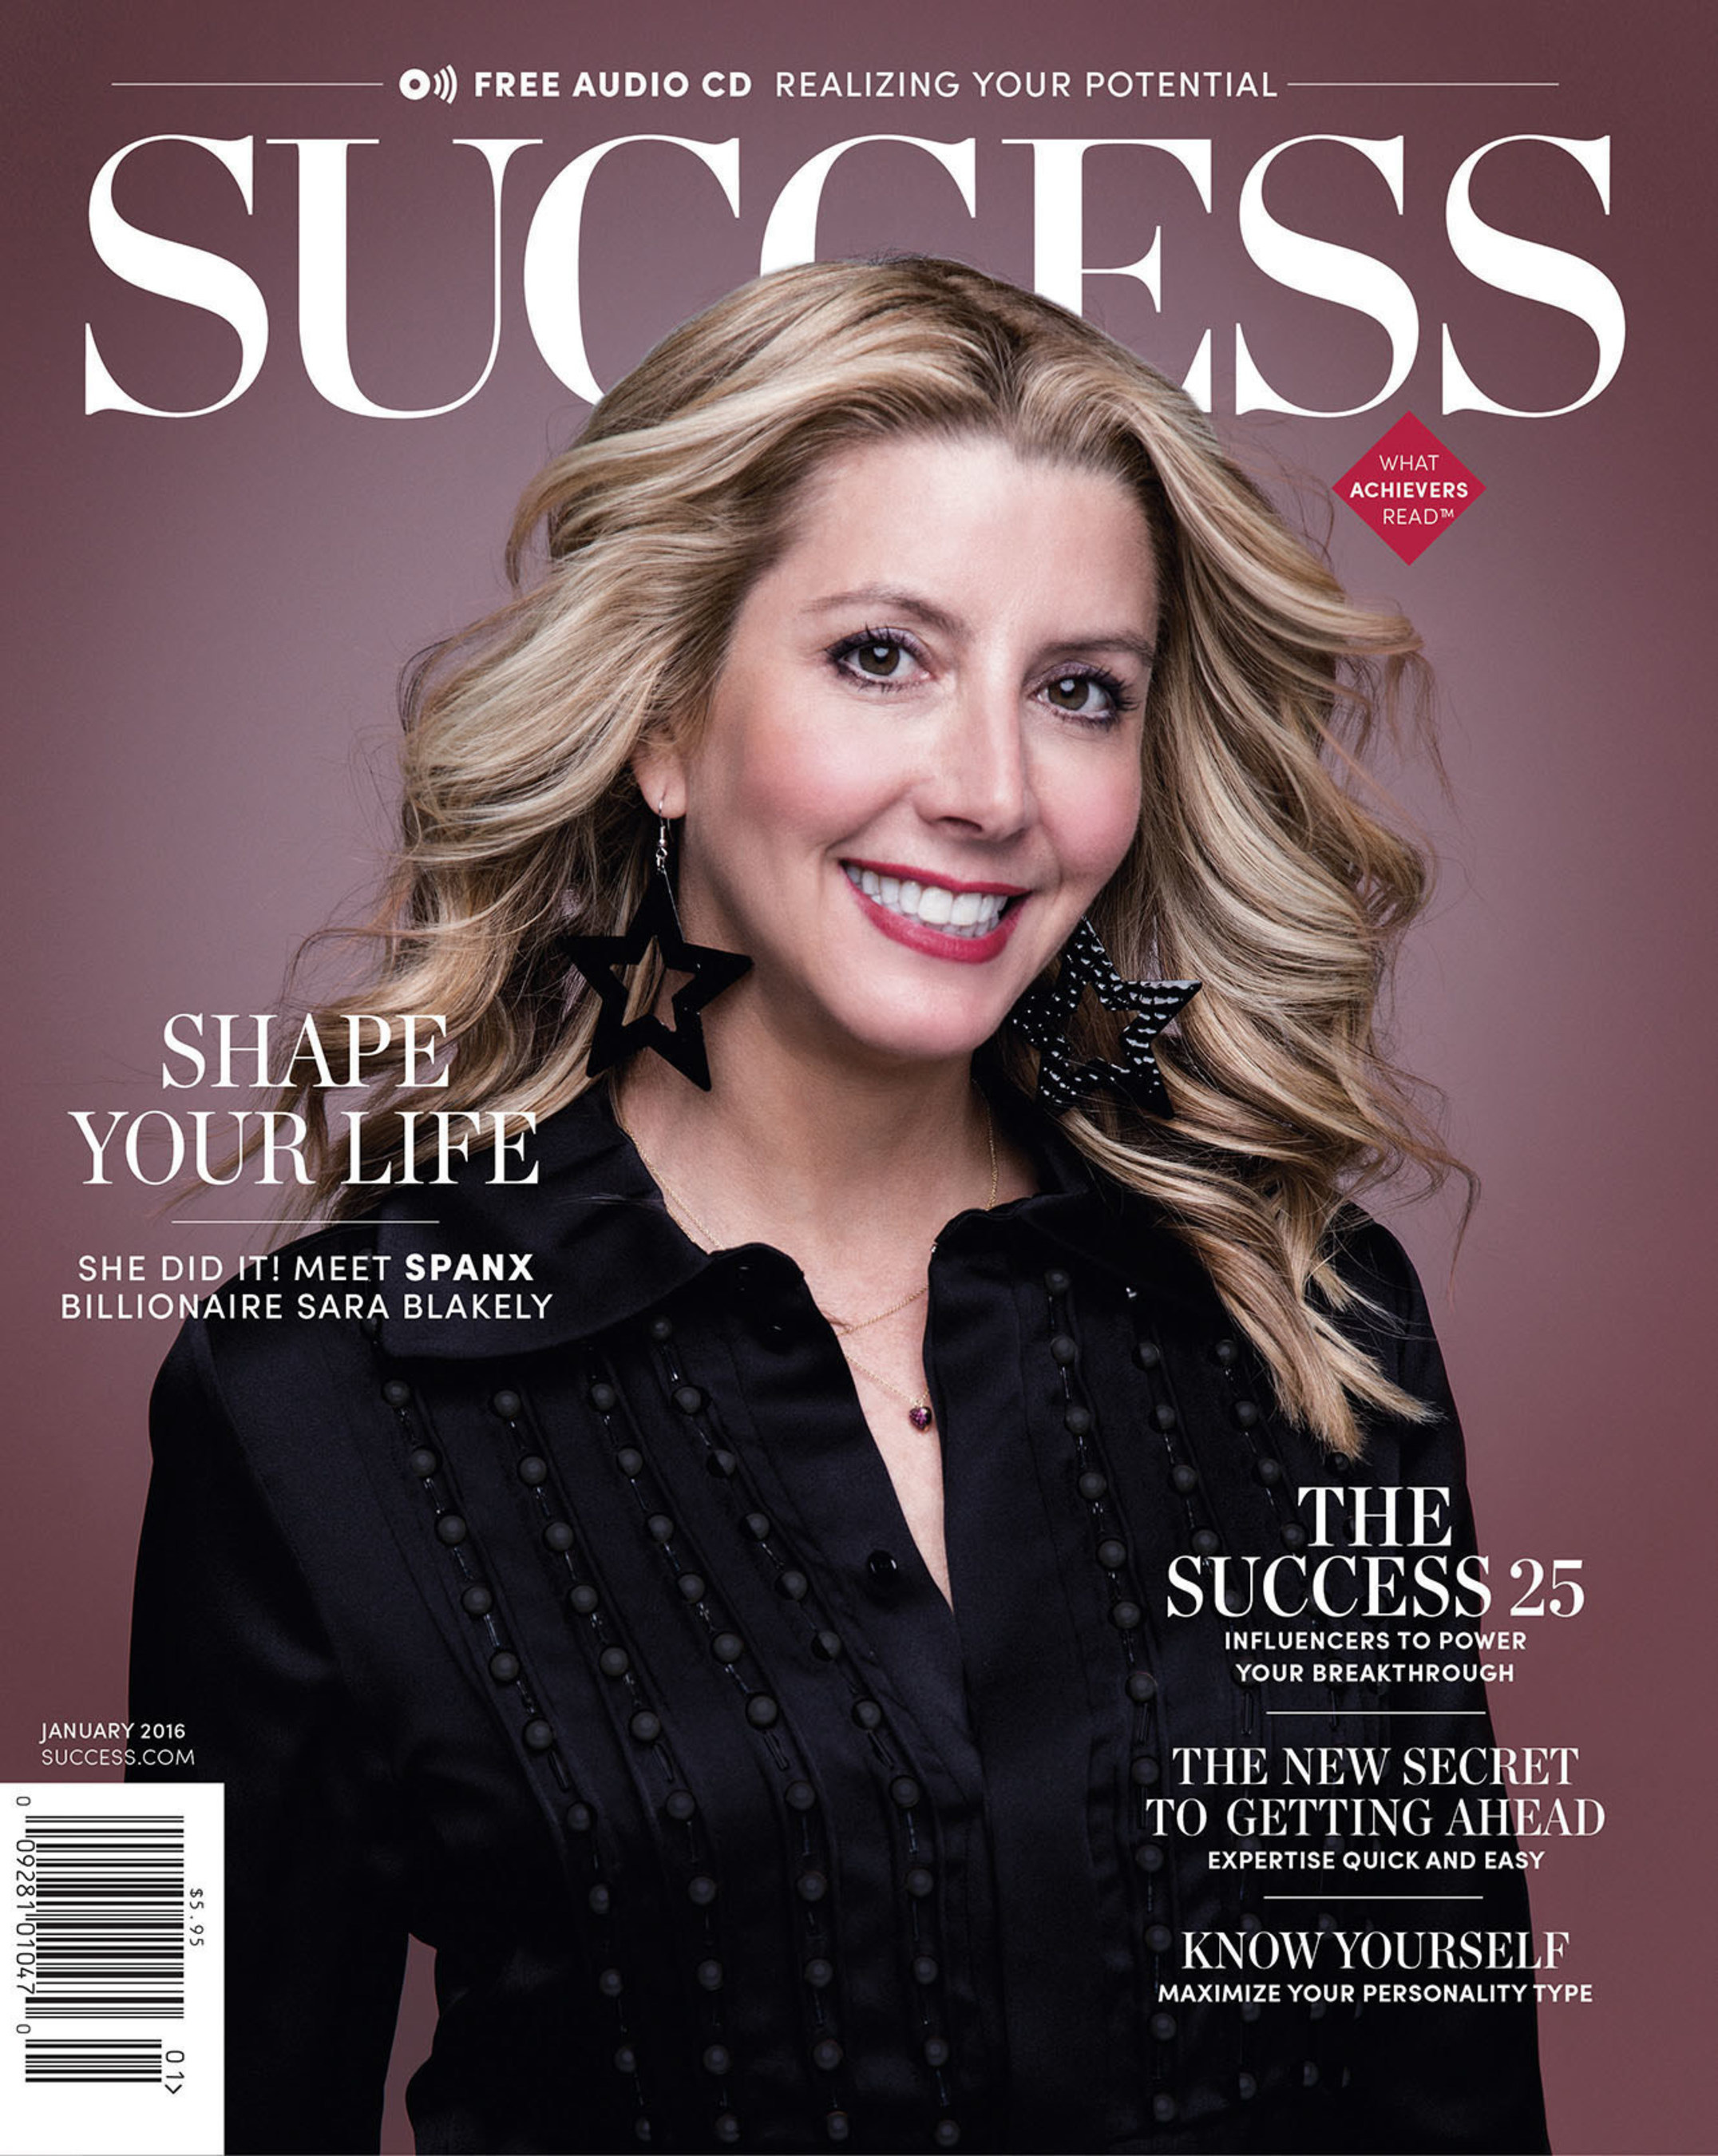 Sara Blakely, the founder of Spanx, an American intimate apparel